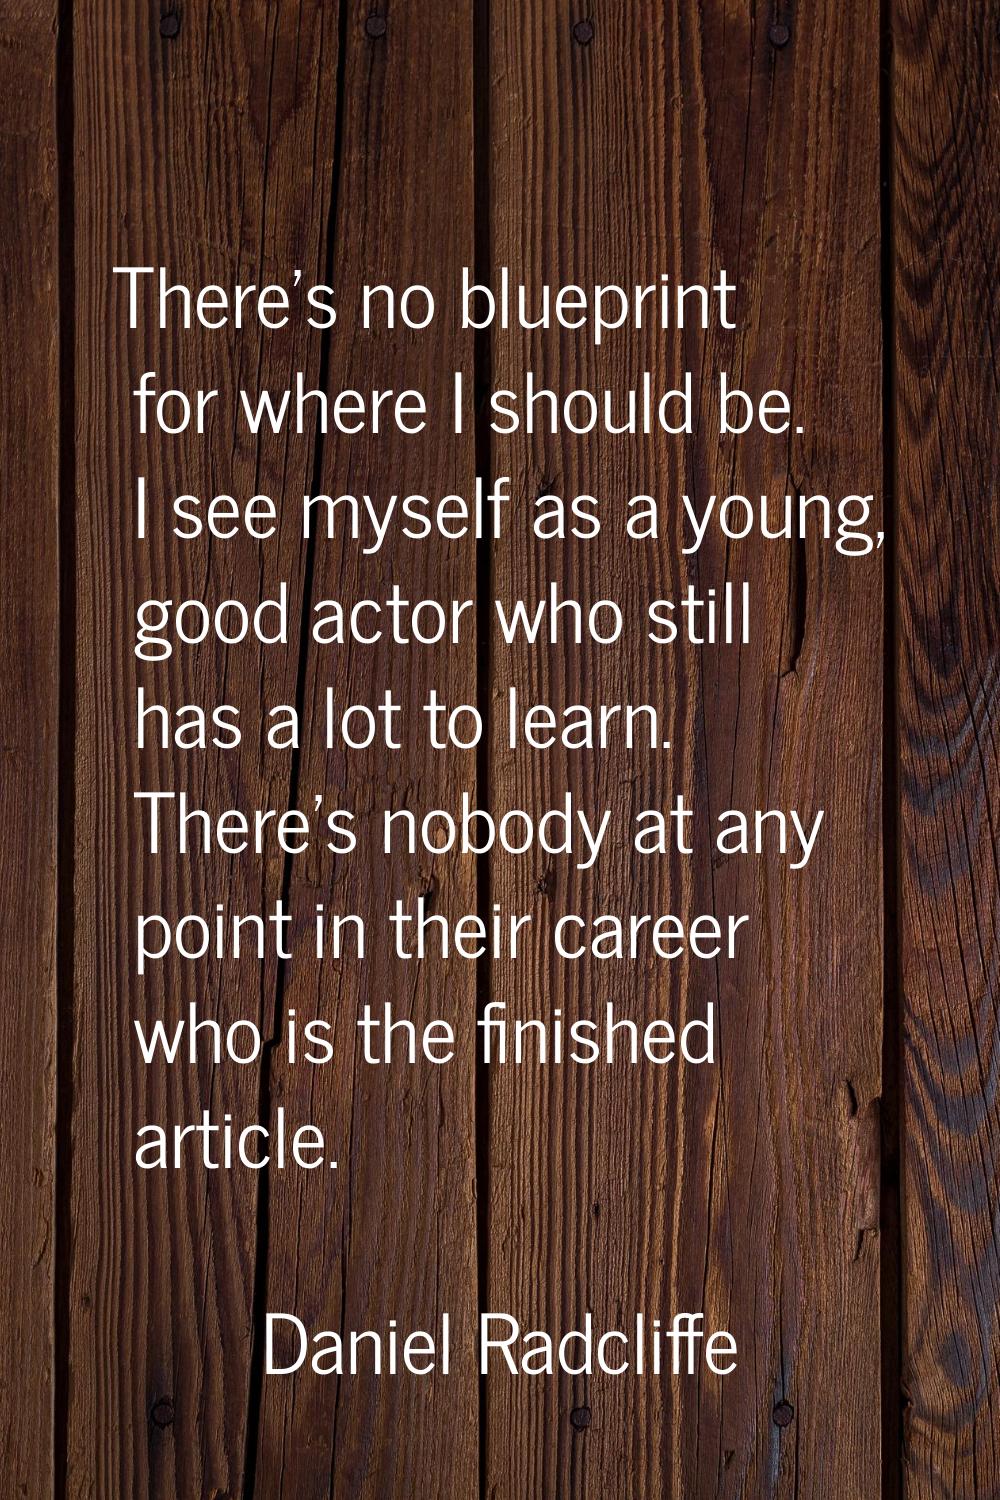 There's no blueprint for where I should be. I see myself as a young, good actor who still has a lot